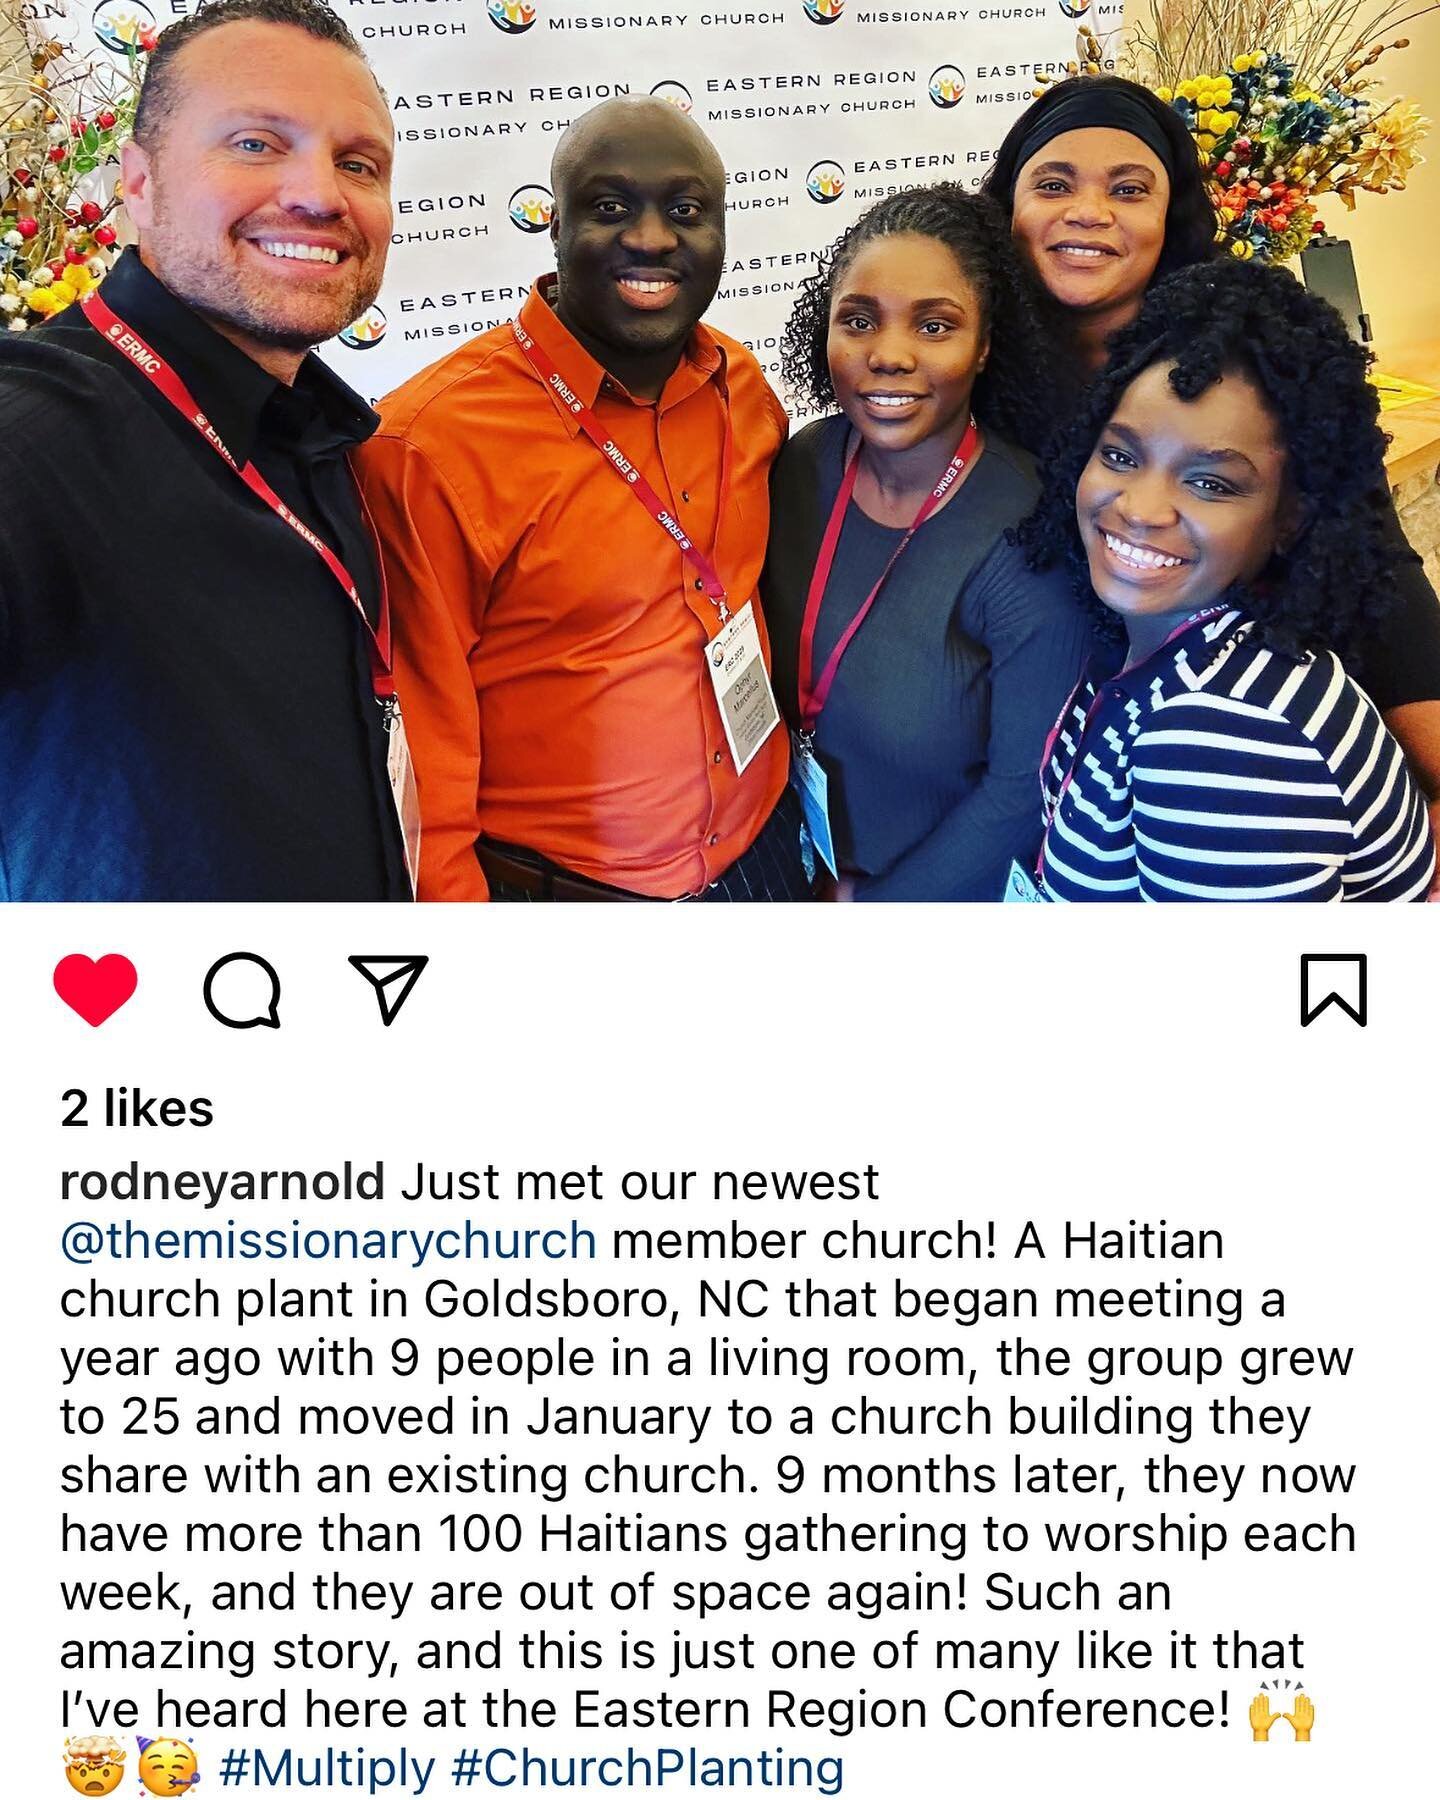 #repost @rodneyarnold //

Multiplying disciples, churches, and networks!